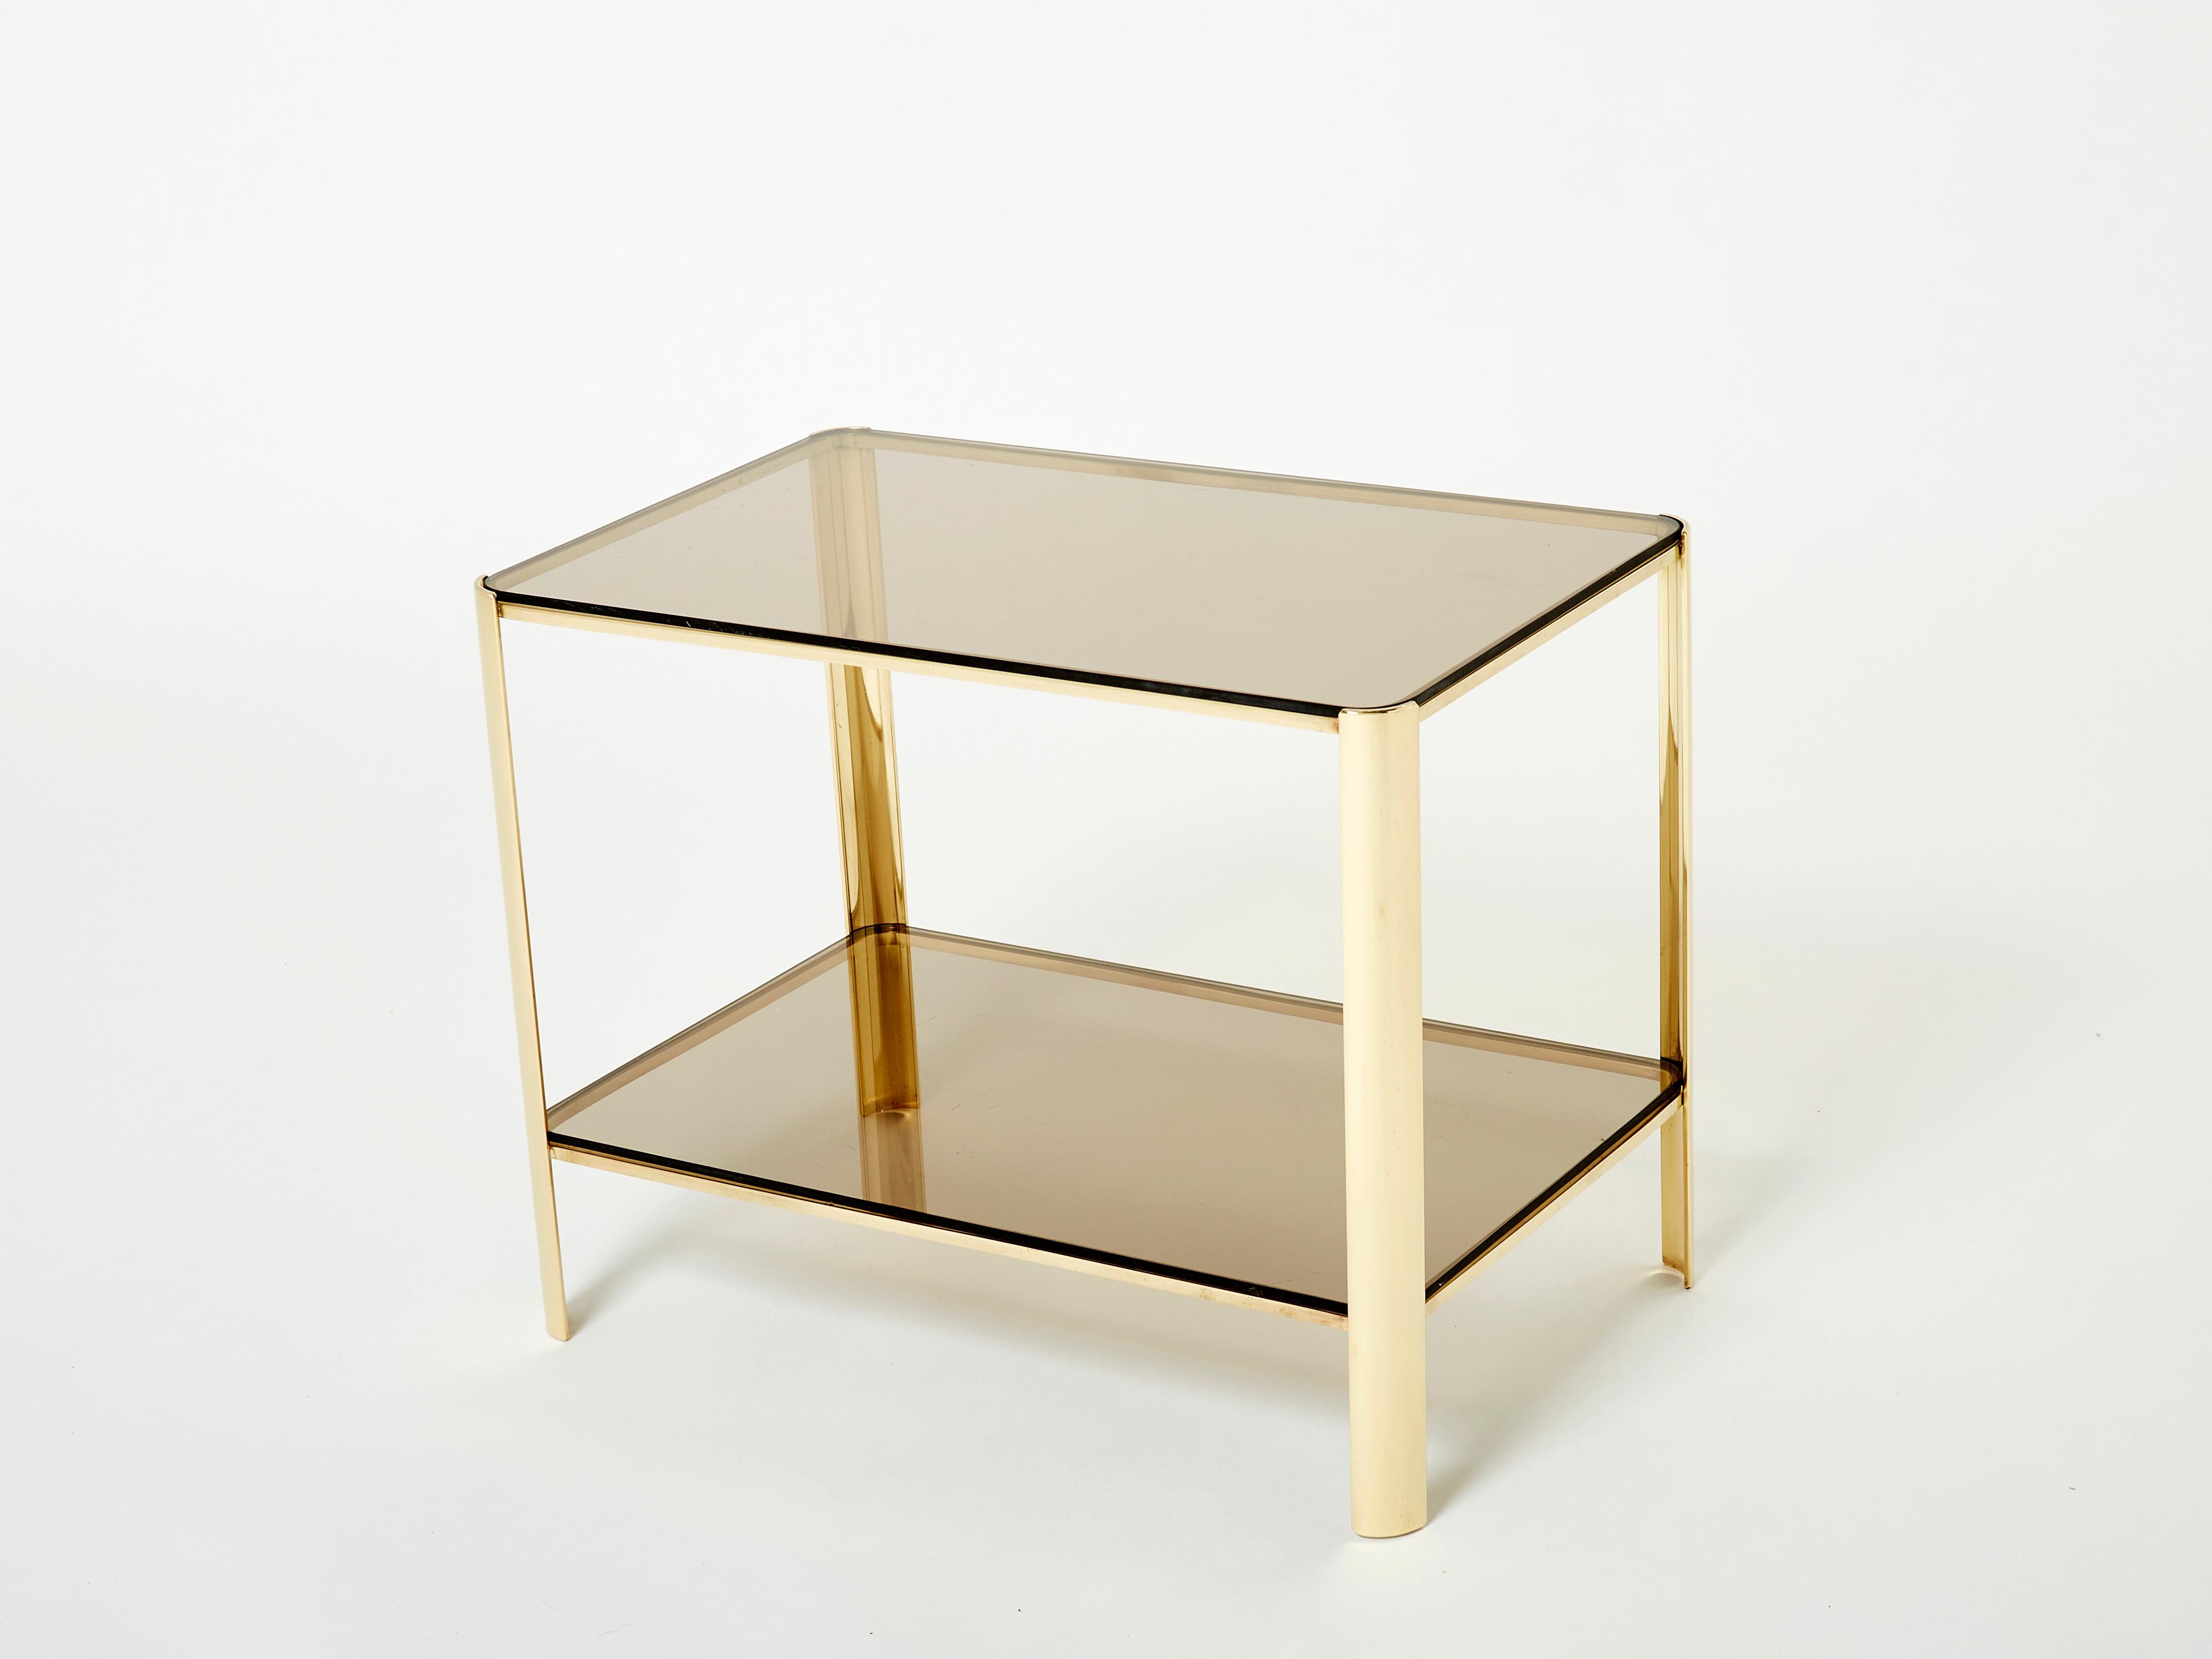 This beautiful two-tier side table designed by Jacques Quinet and stamped by Broncz, is a beauty. The table features a strong, solid polished bronze structure built to last forever. The two original brown smoked glass tops add a nice aesthetic